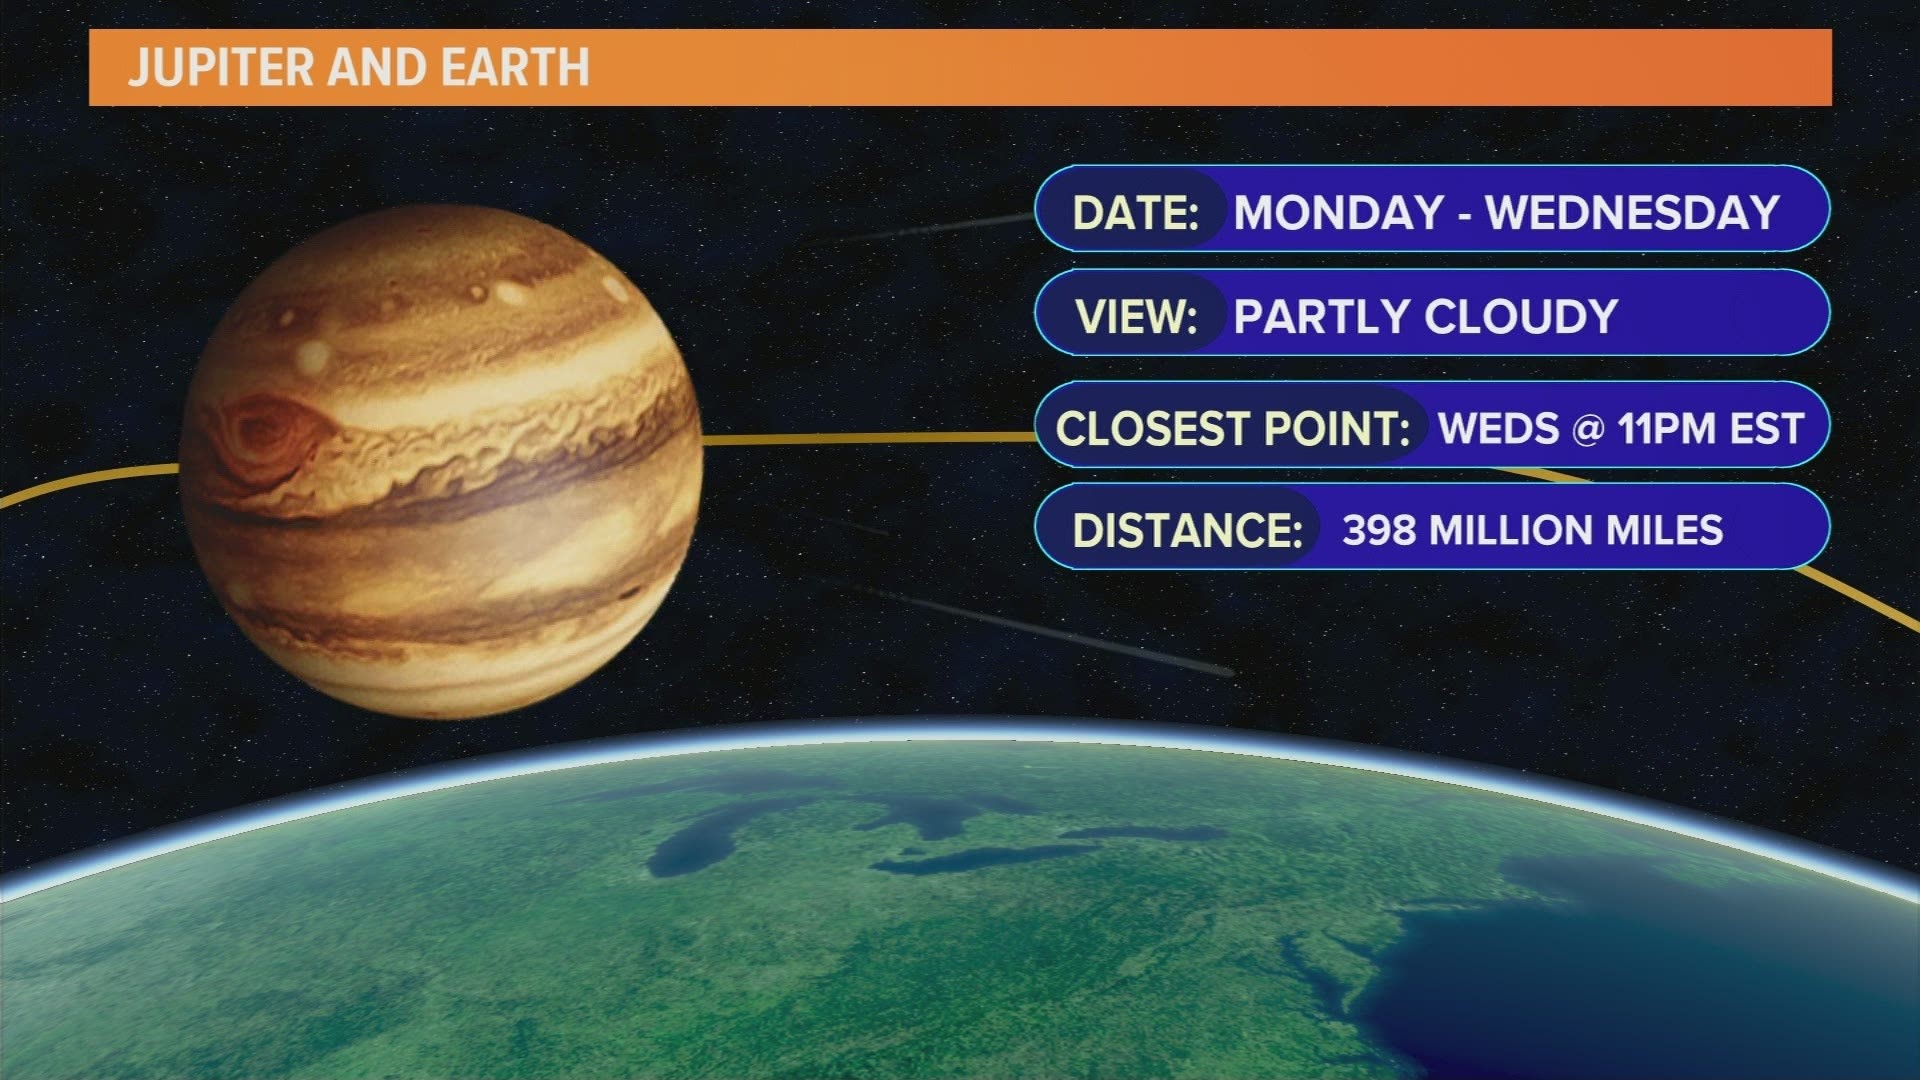 Break out your telescope - Jupiter will be close enough to see in June as the planet comes closer to Earth.